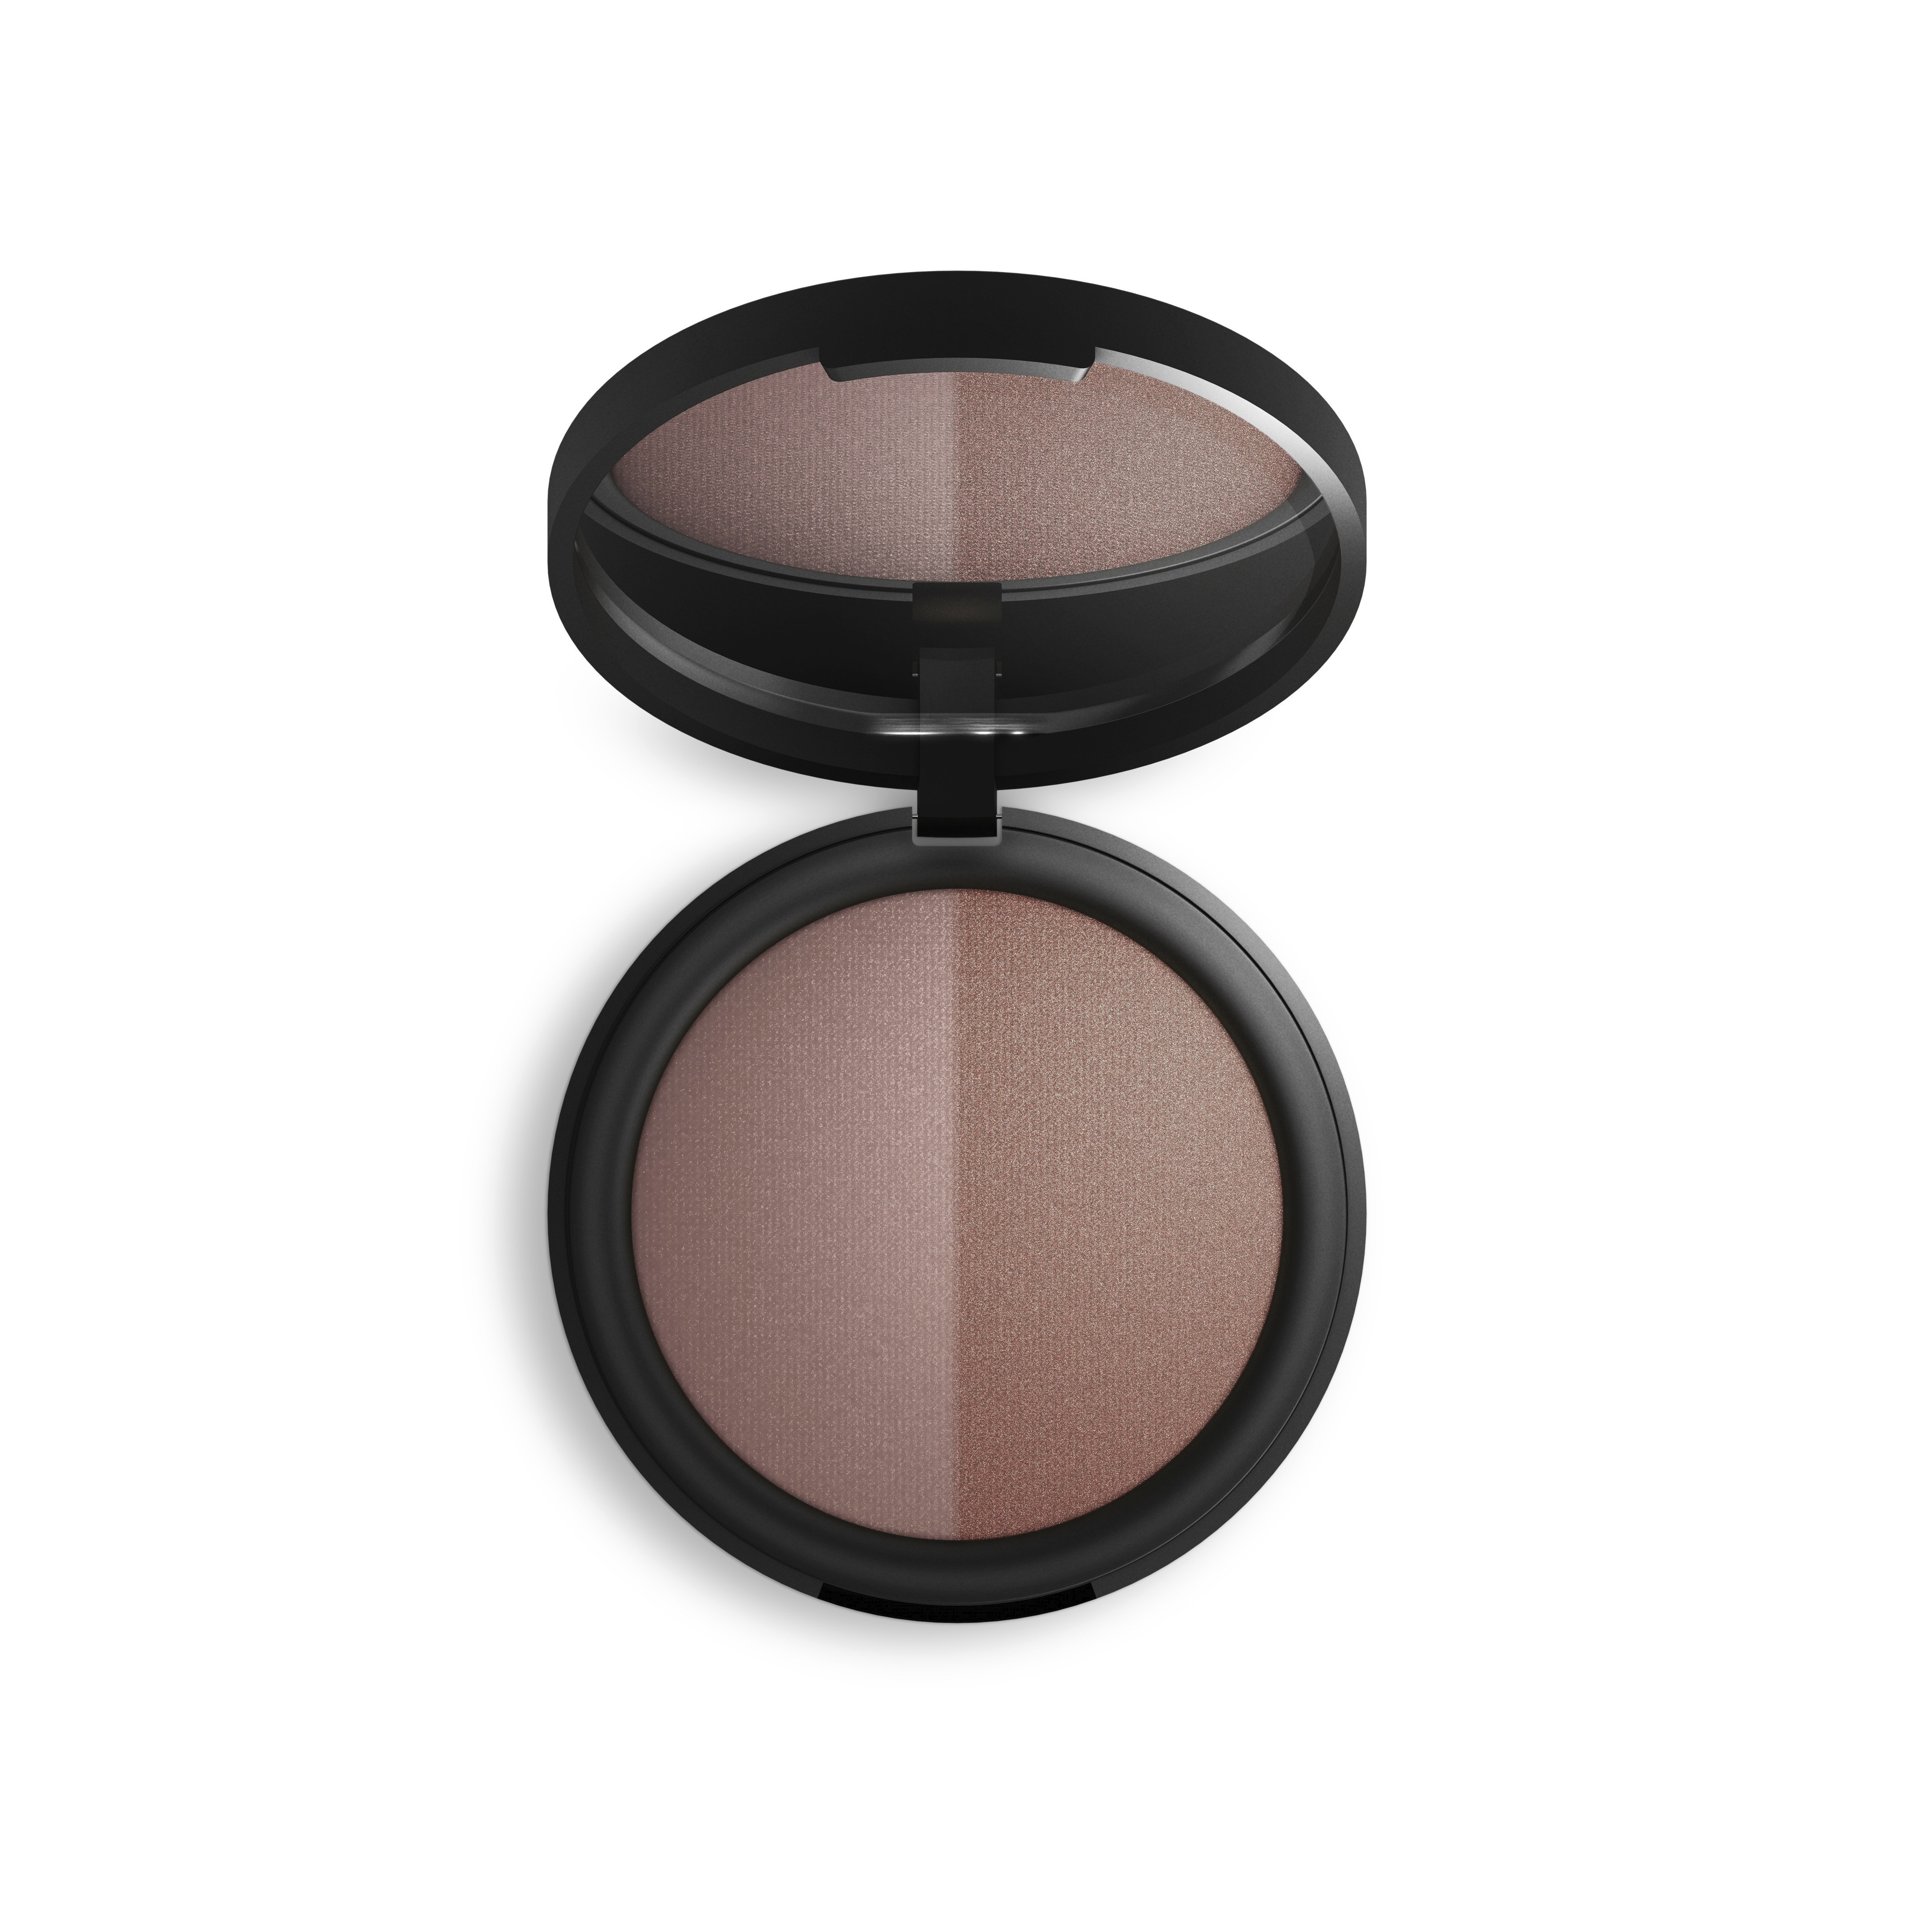 7. blusher-mineral-baked-blush-duo-2